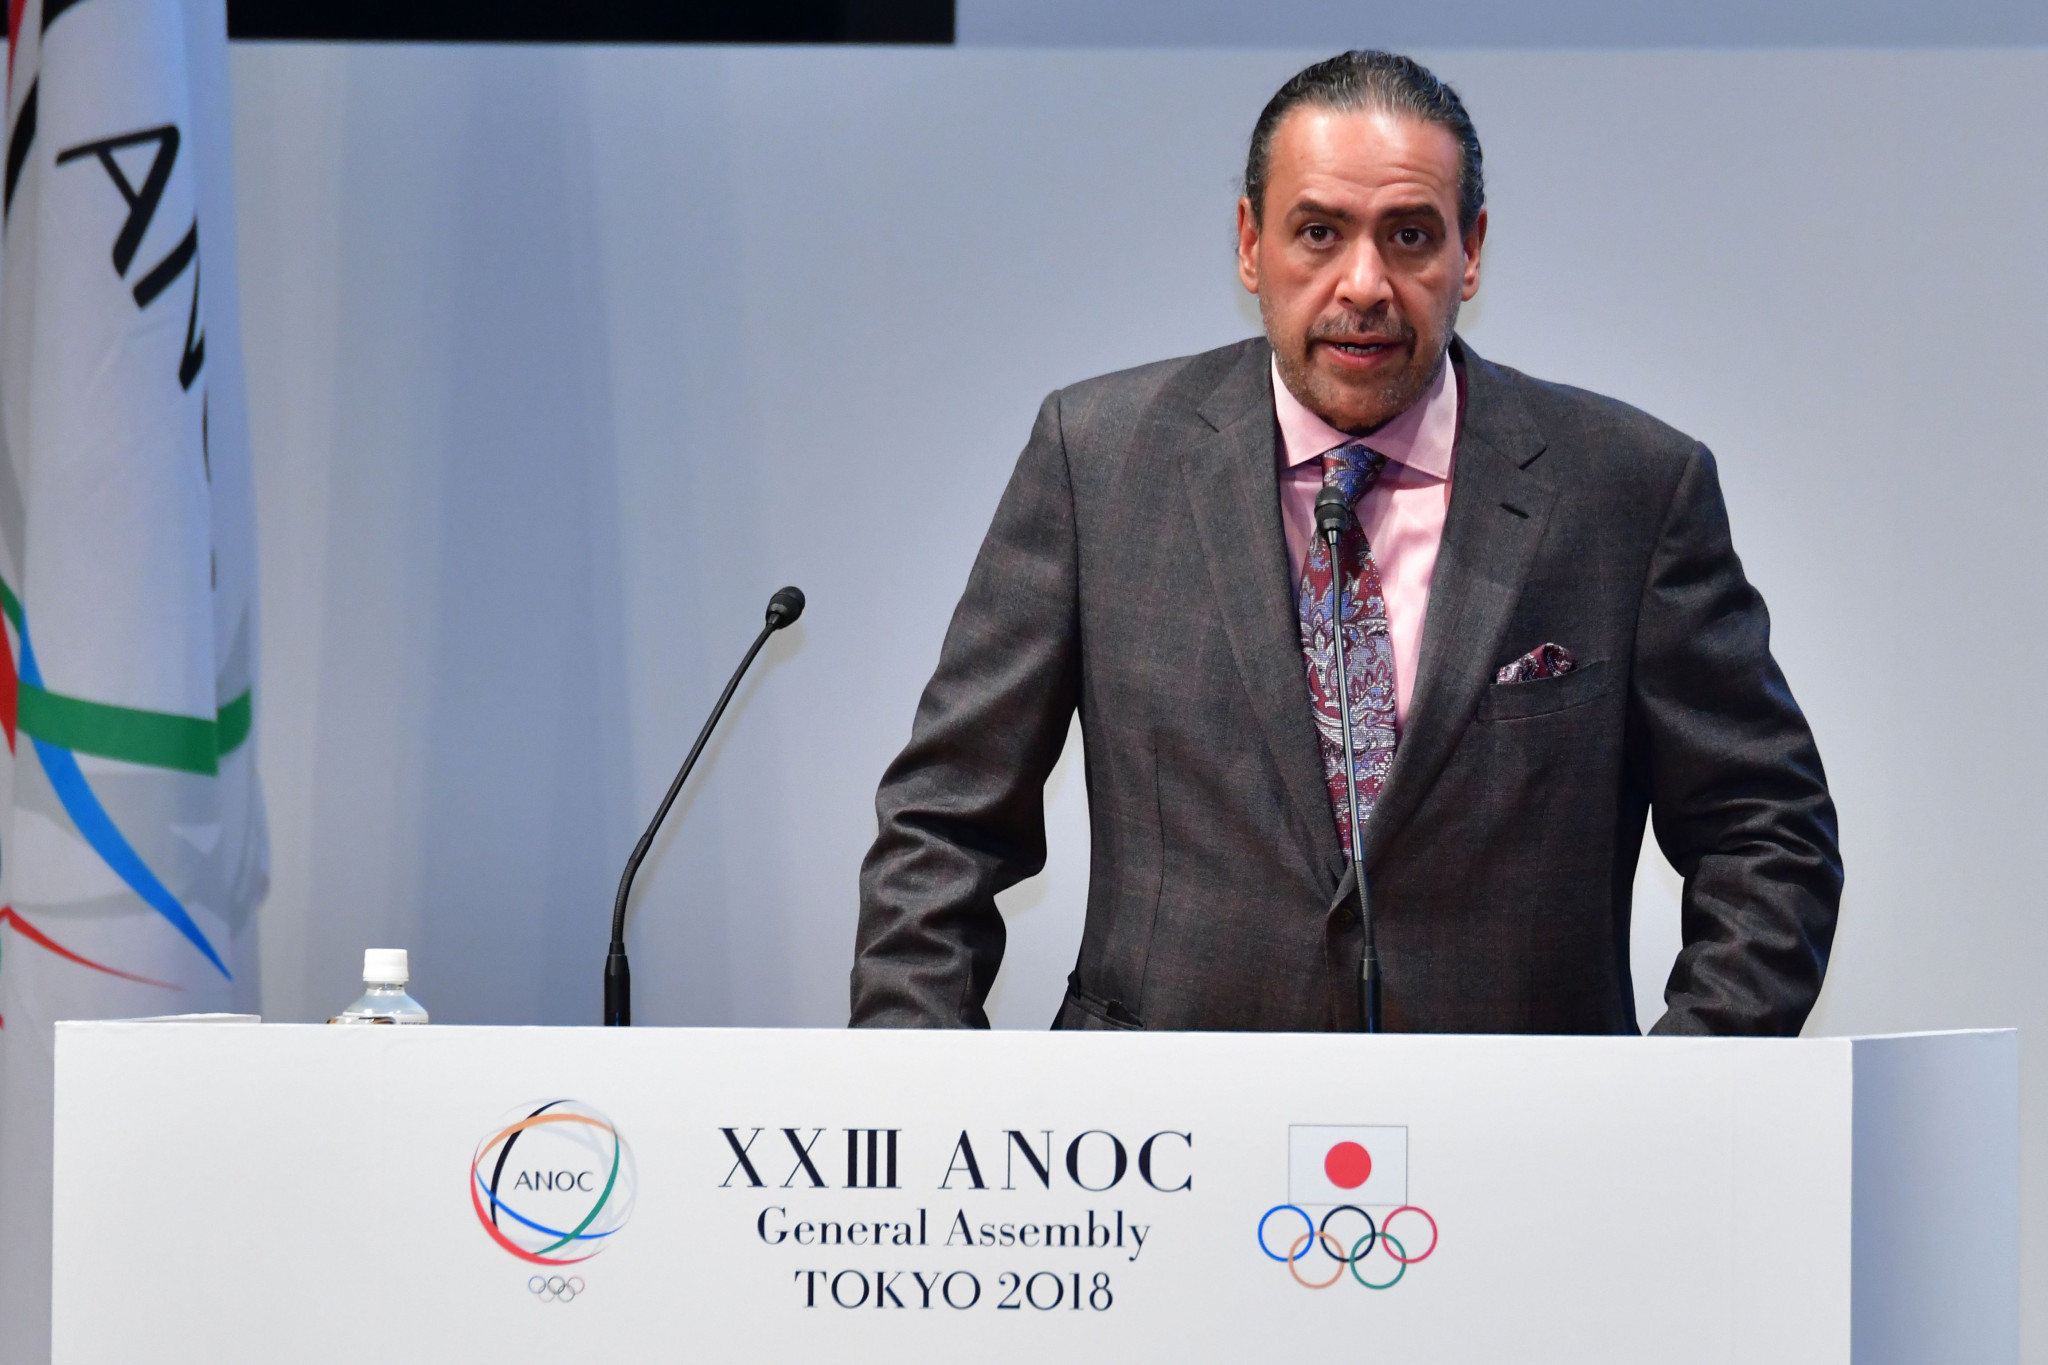 Sheikh Ahmad stands aside as ANOC President after return to plead with General Assembly 